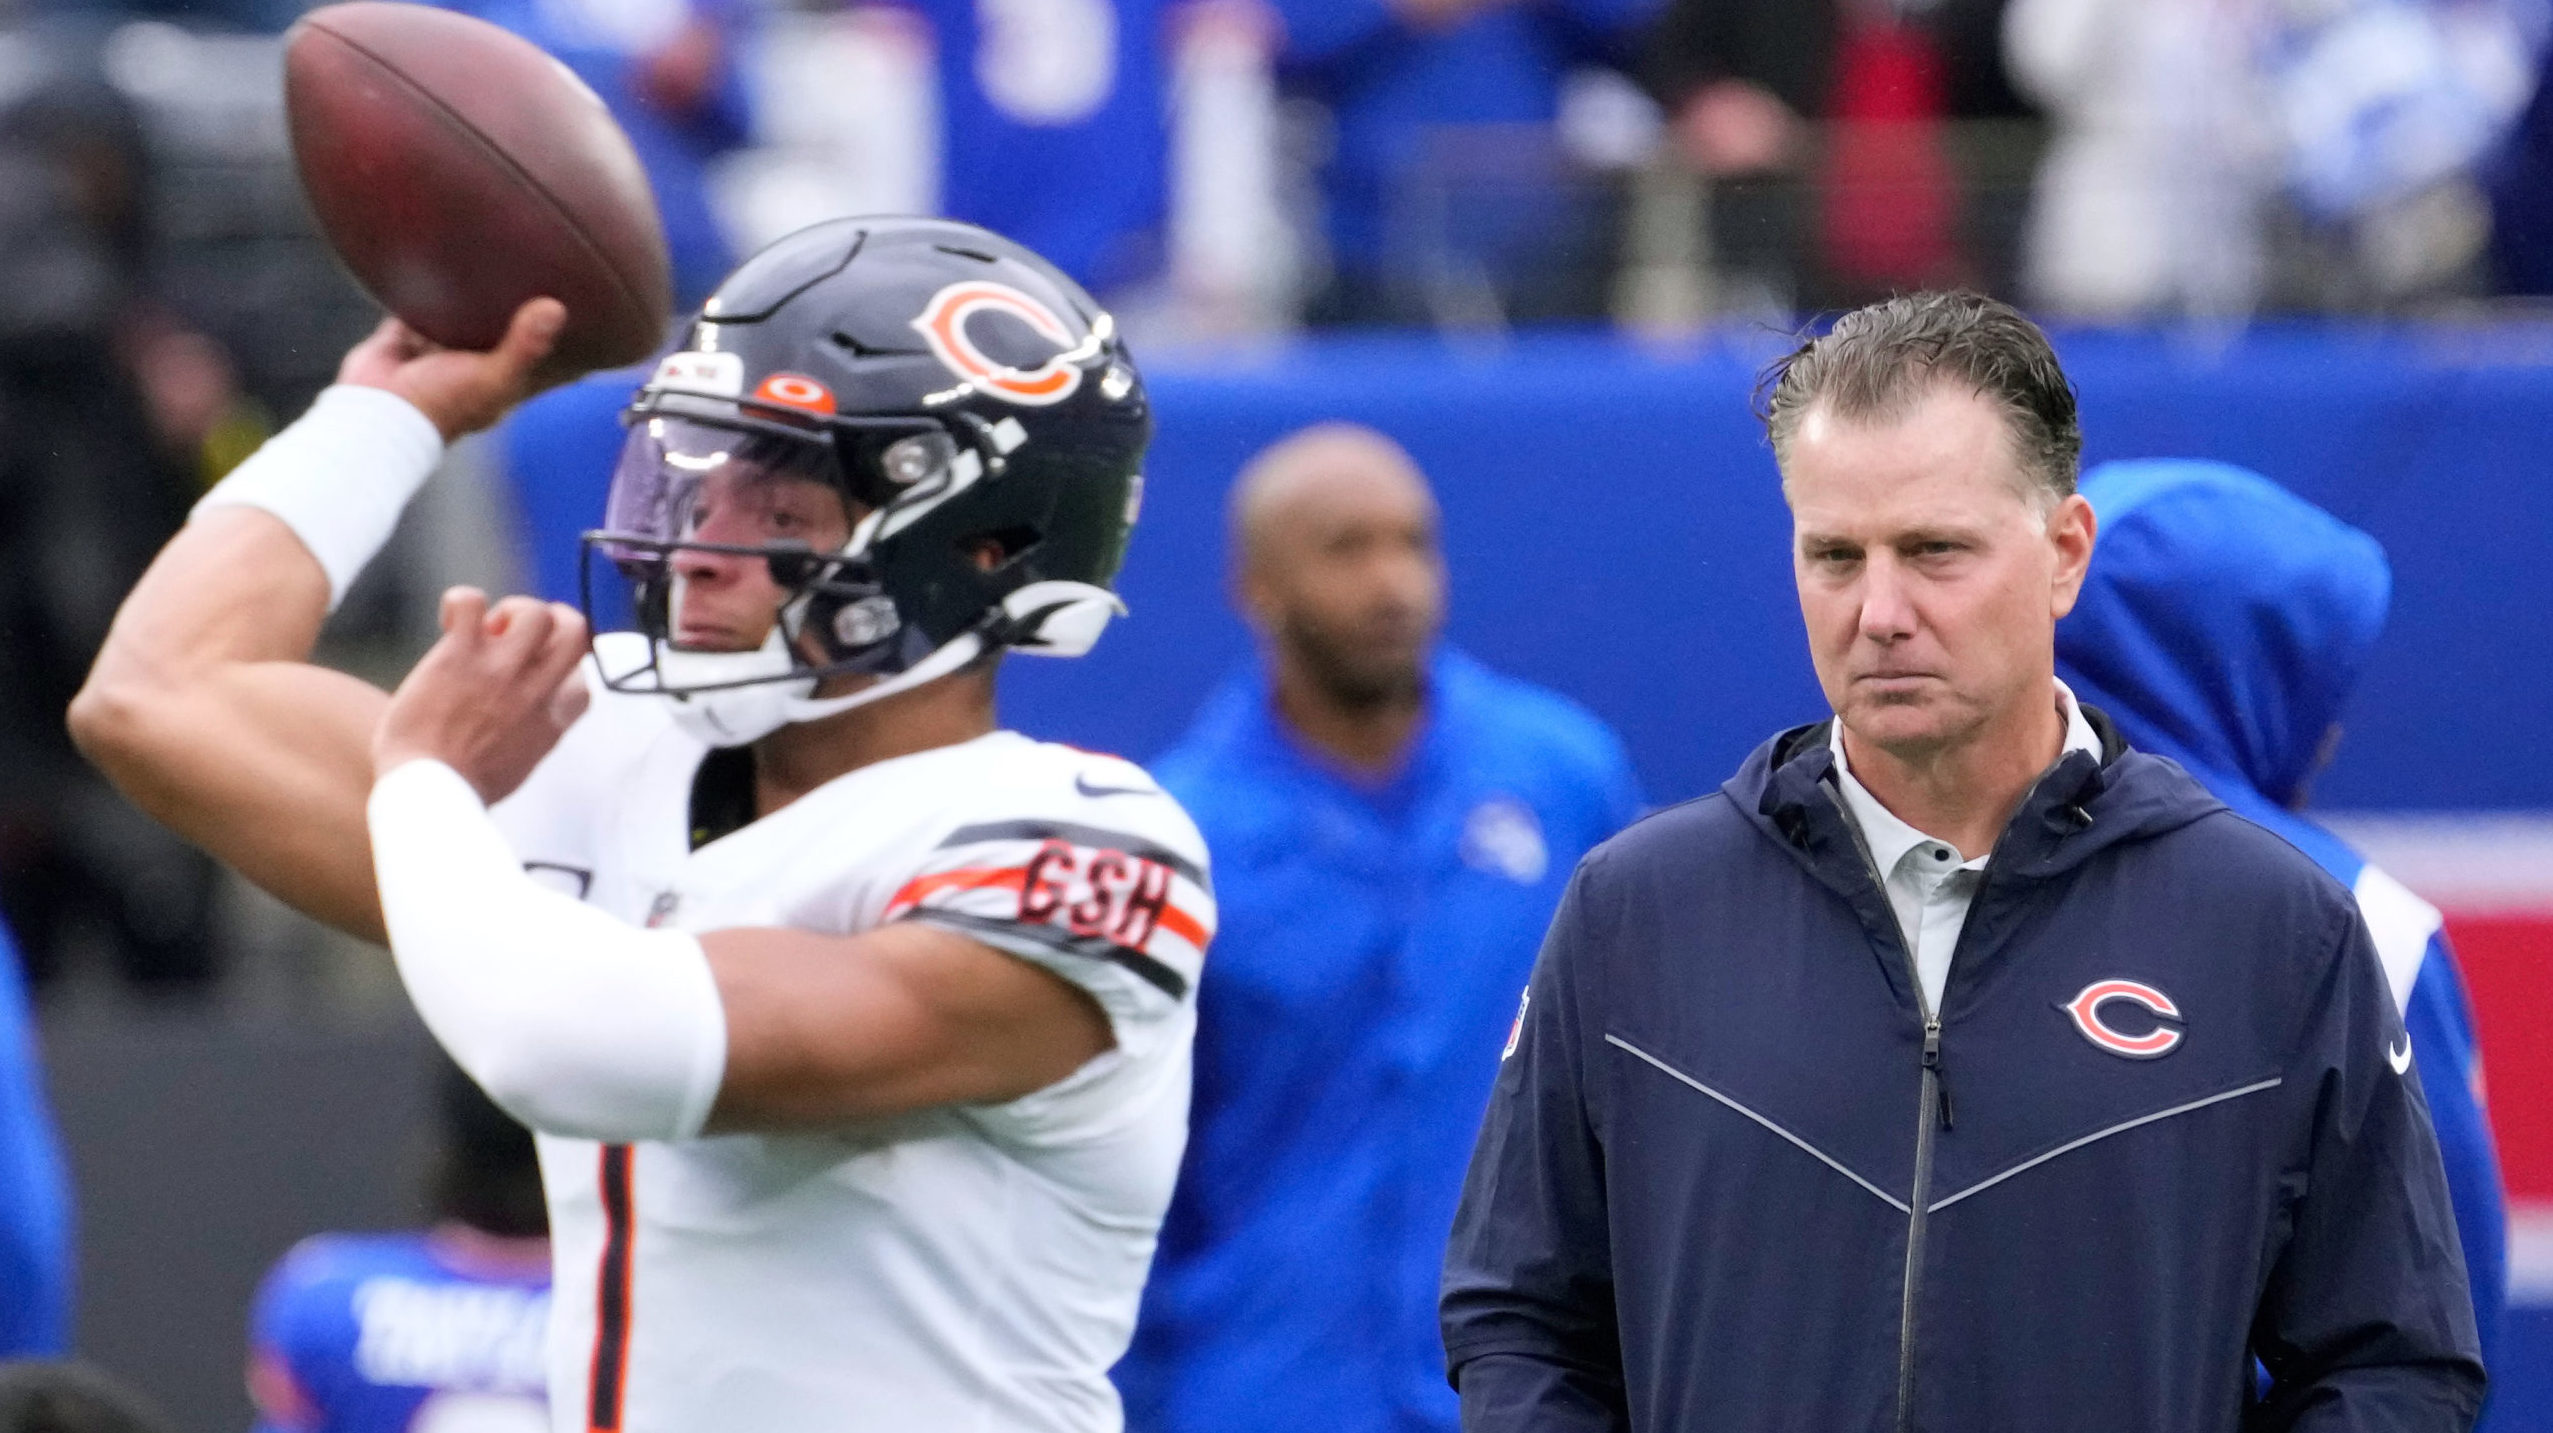 Bears’ Offseason Moves Provide Chance to Go From Worst to First